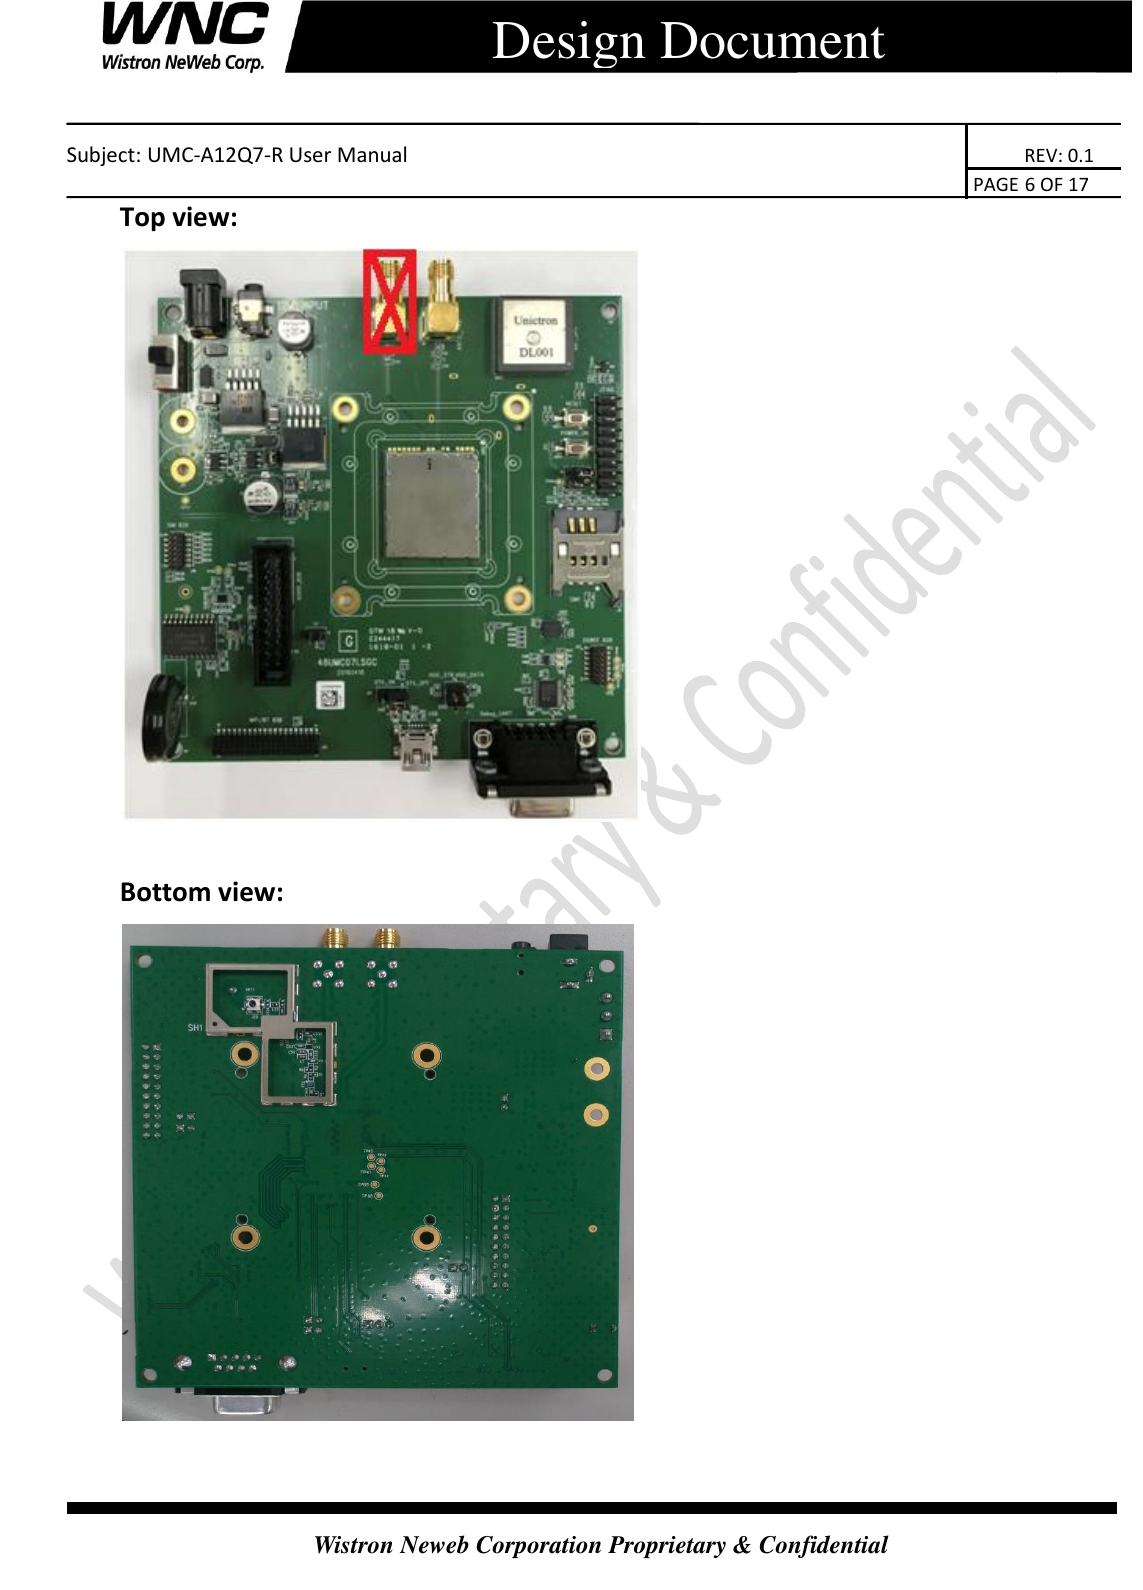    Subject: UMC-A12Q7-R User Manual                                                                      REV: 0.1                                                                                        PAGE 6 OF 17  Wistron Neweb Corporation Proprietary &amp; Confidential      Design Document Top view:   Bottom view:   